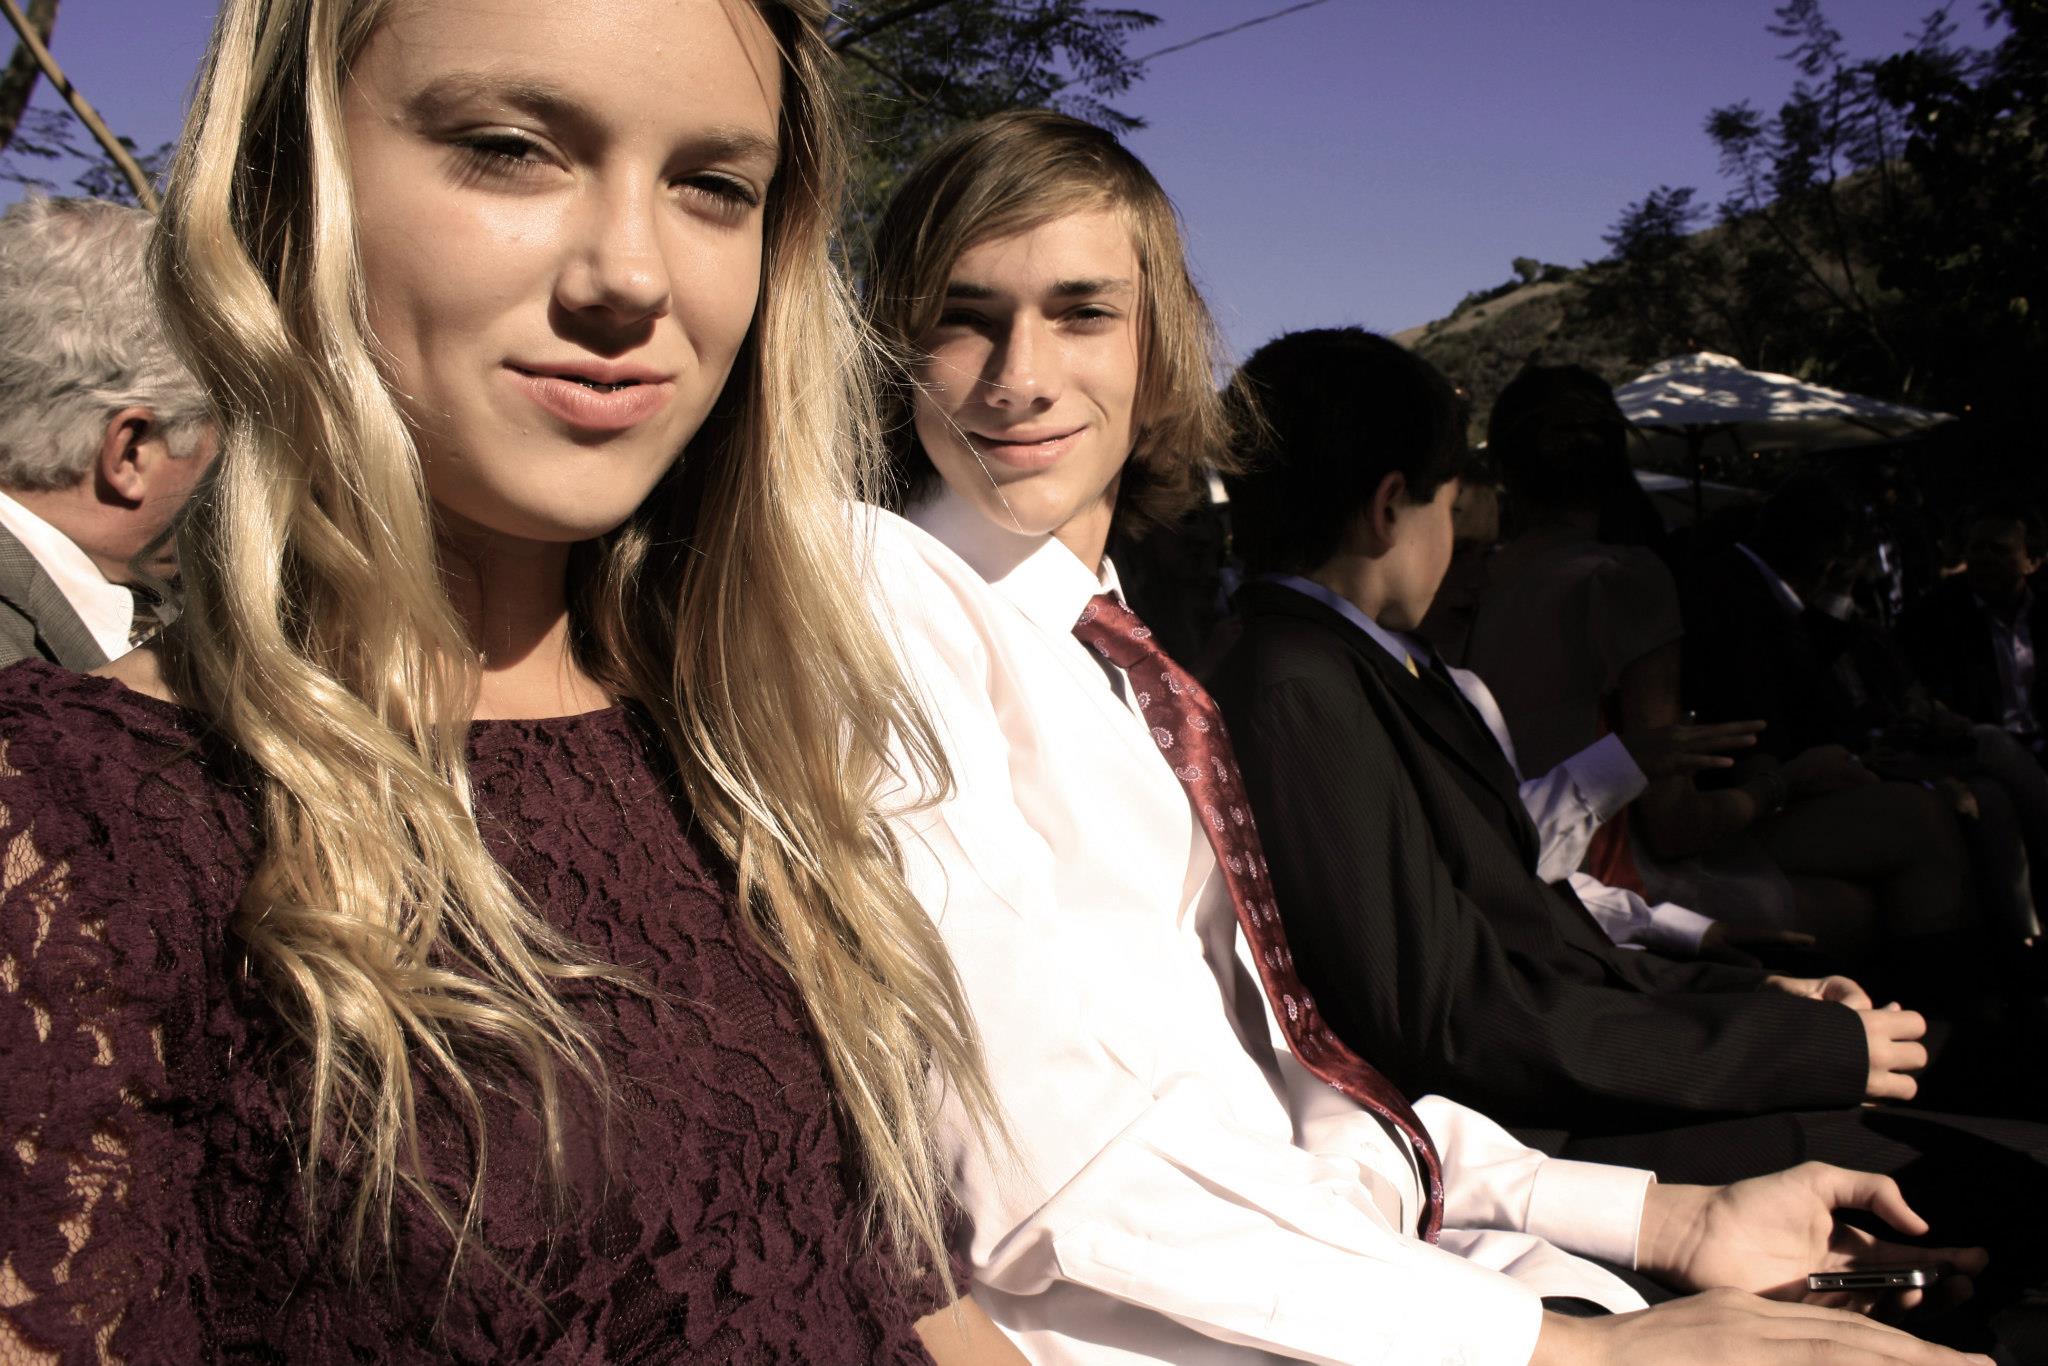 Two of my children, Darian-left and Beau-right, at my sister's wedding in 2012.